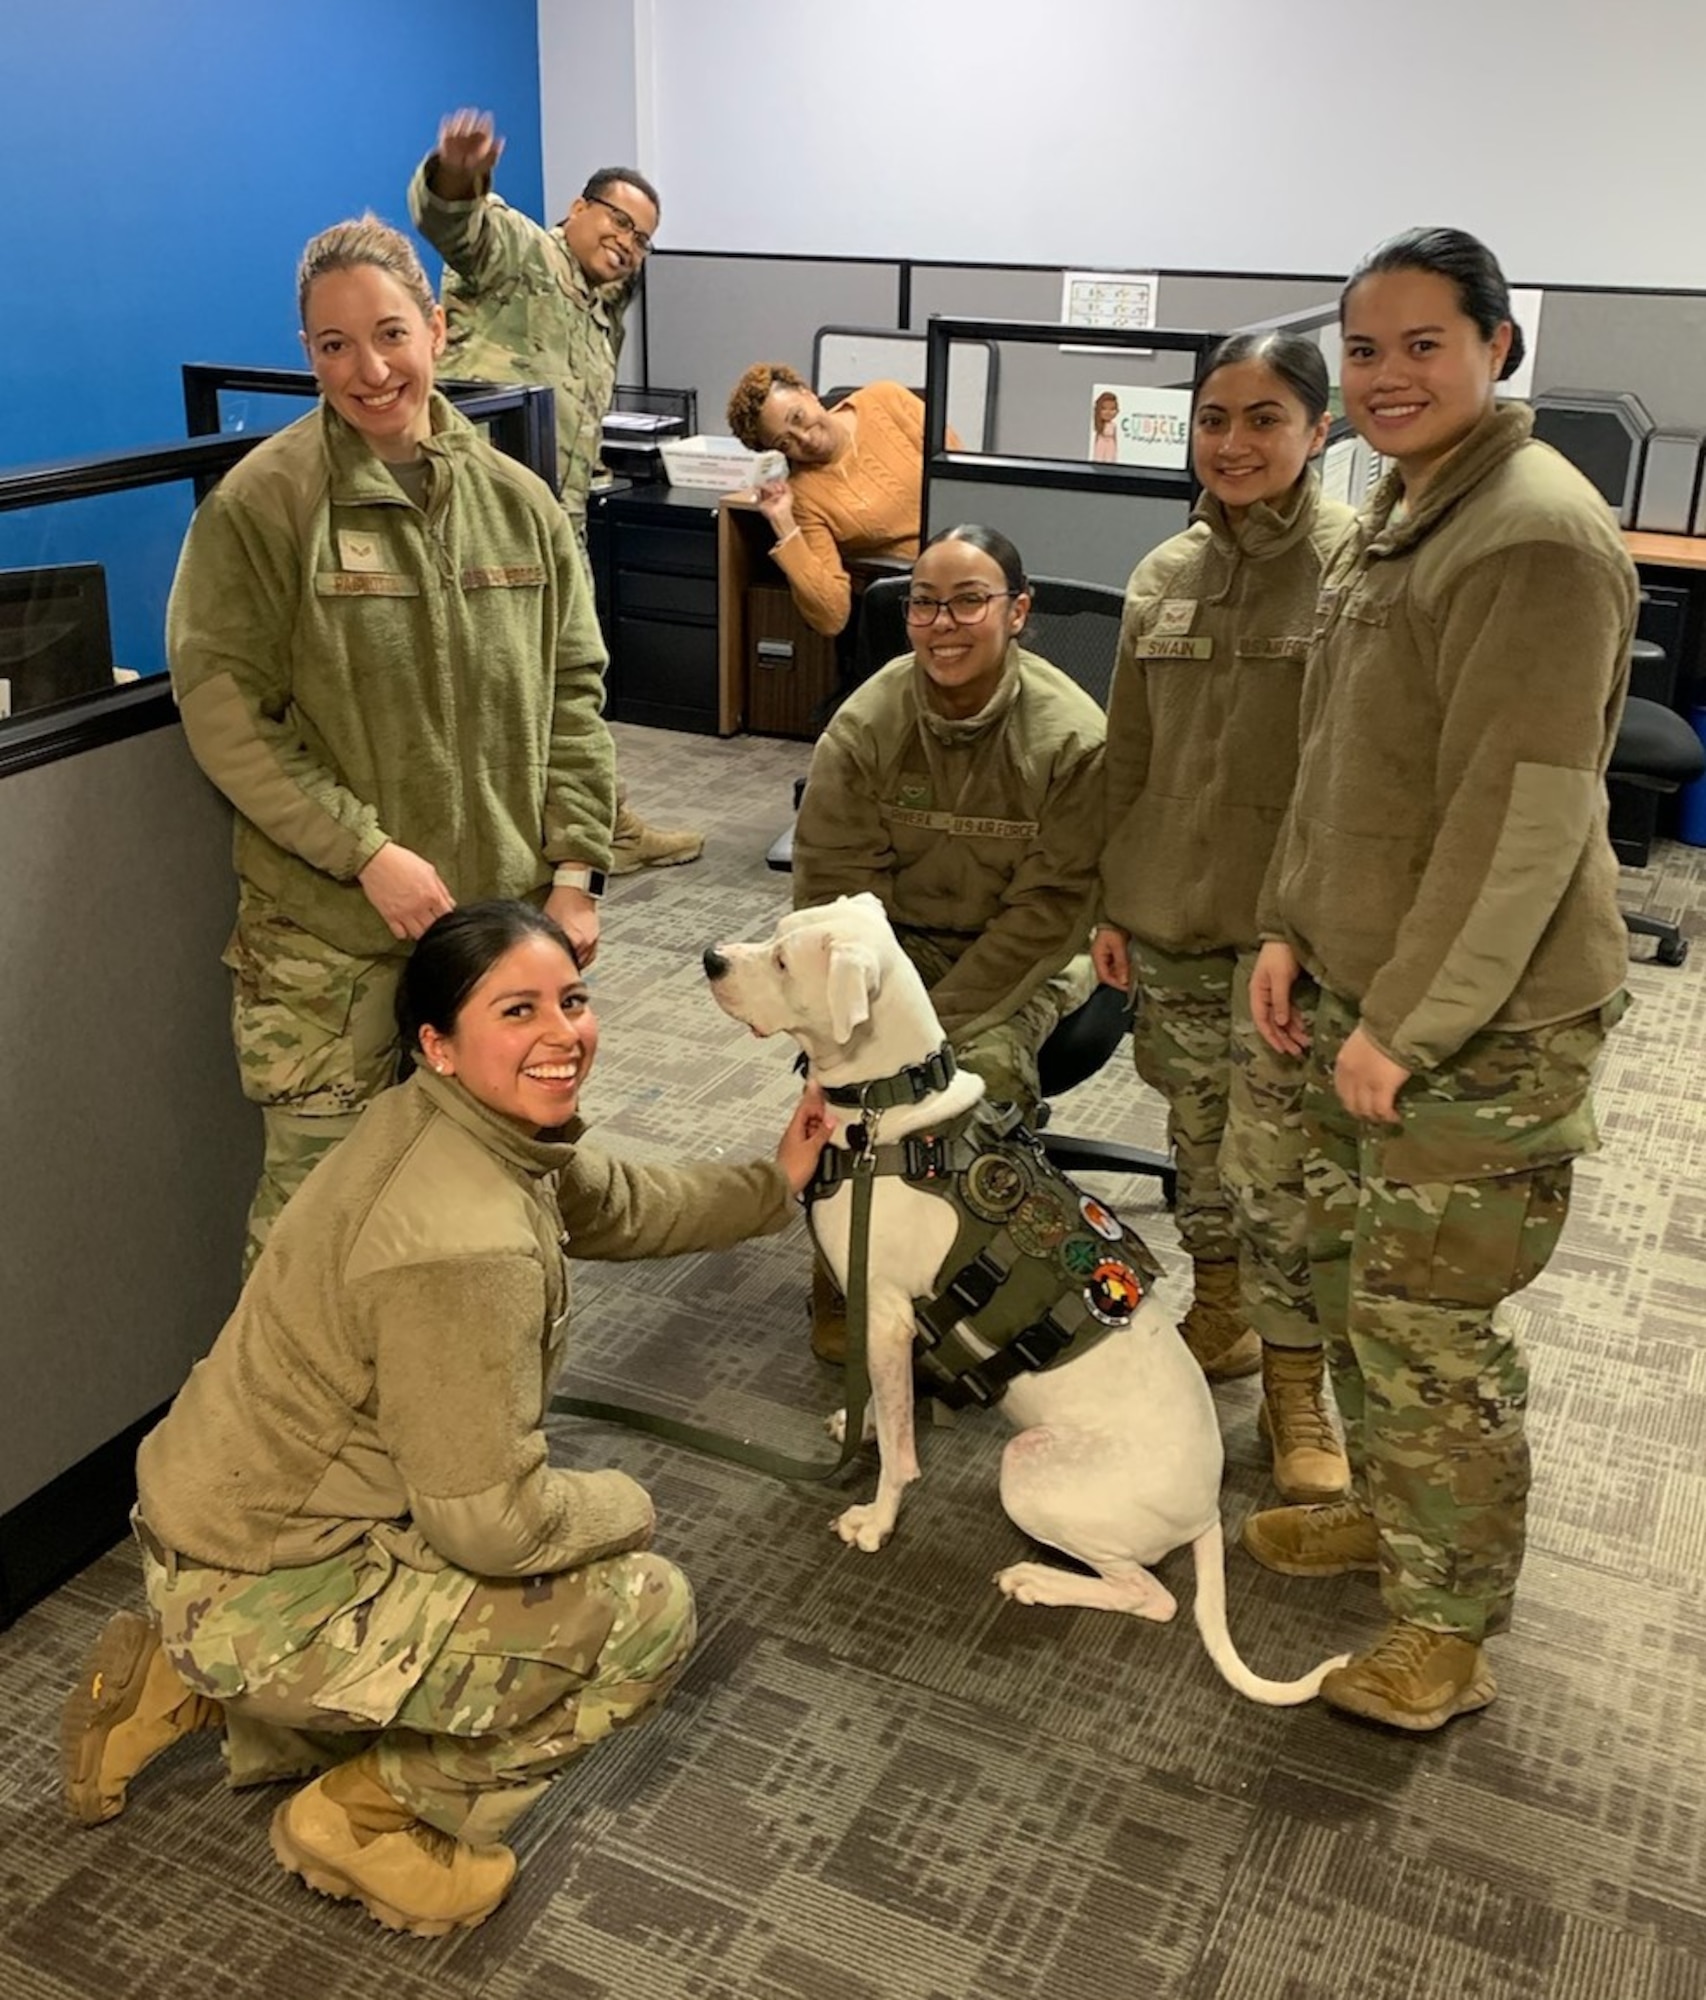 Therapy dog brings smiles to Guardsmen